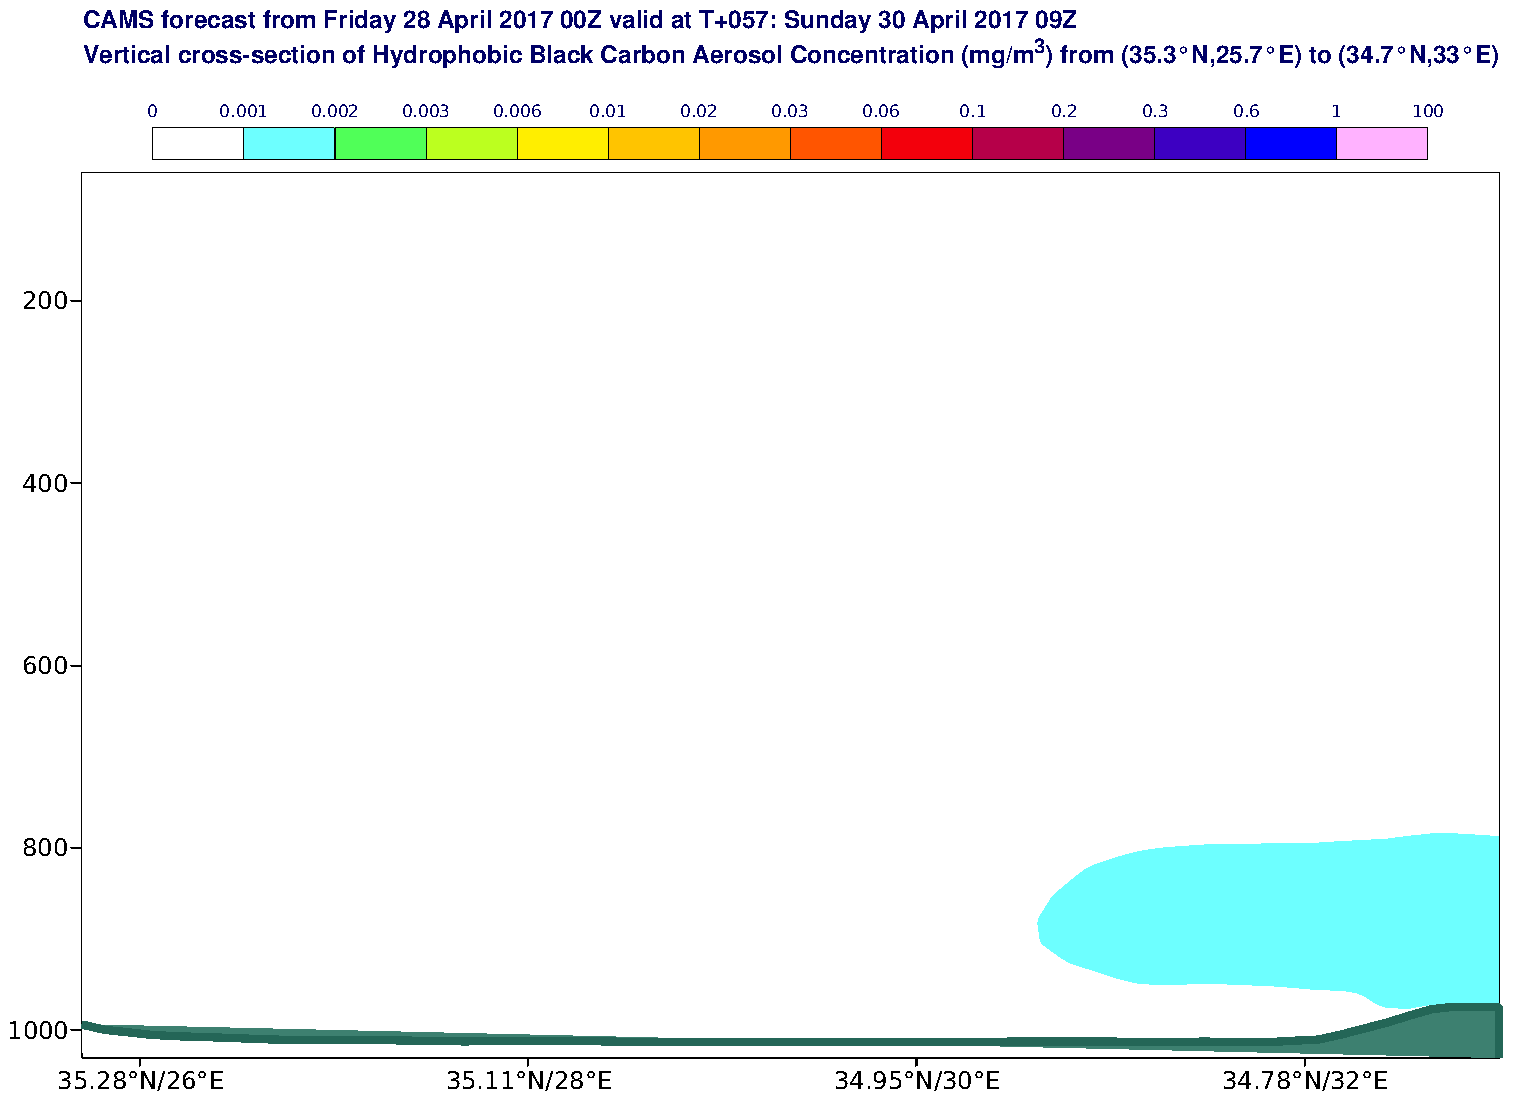 Vertical cross-section of Hydrophobic Black Carbon Aerosol Concentration (mg/m3) valid at T57 - 2017-04-30 09:00